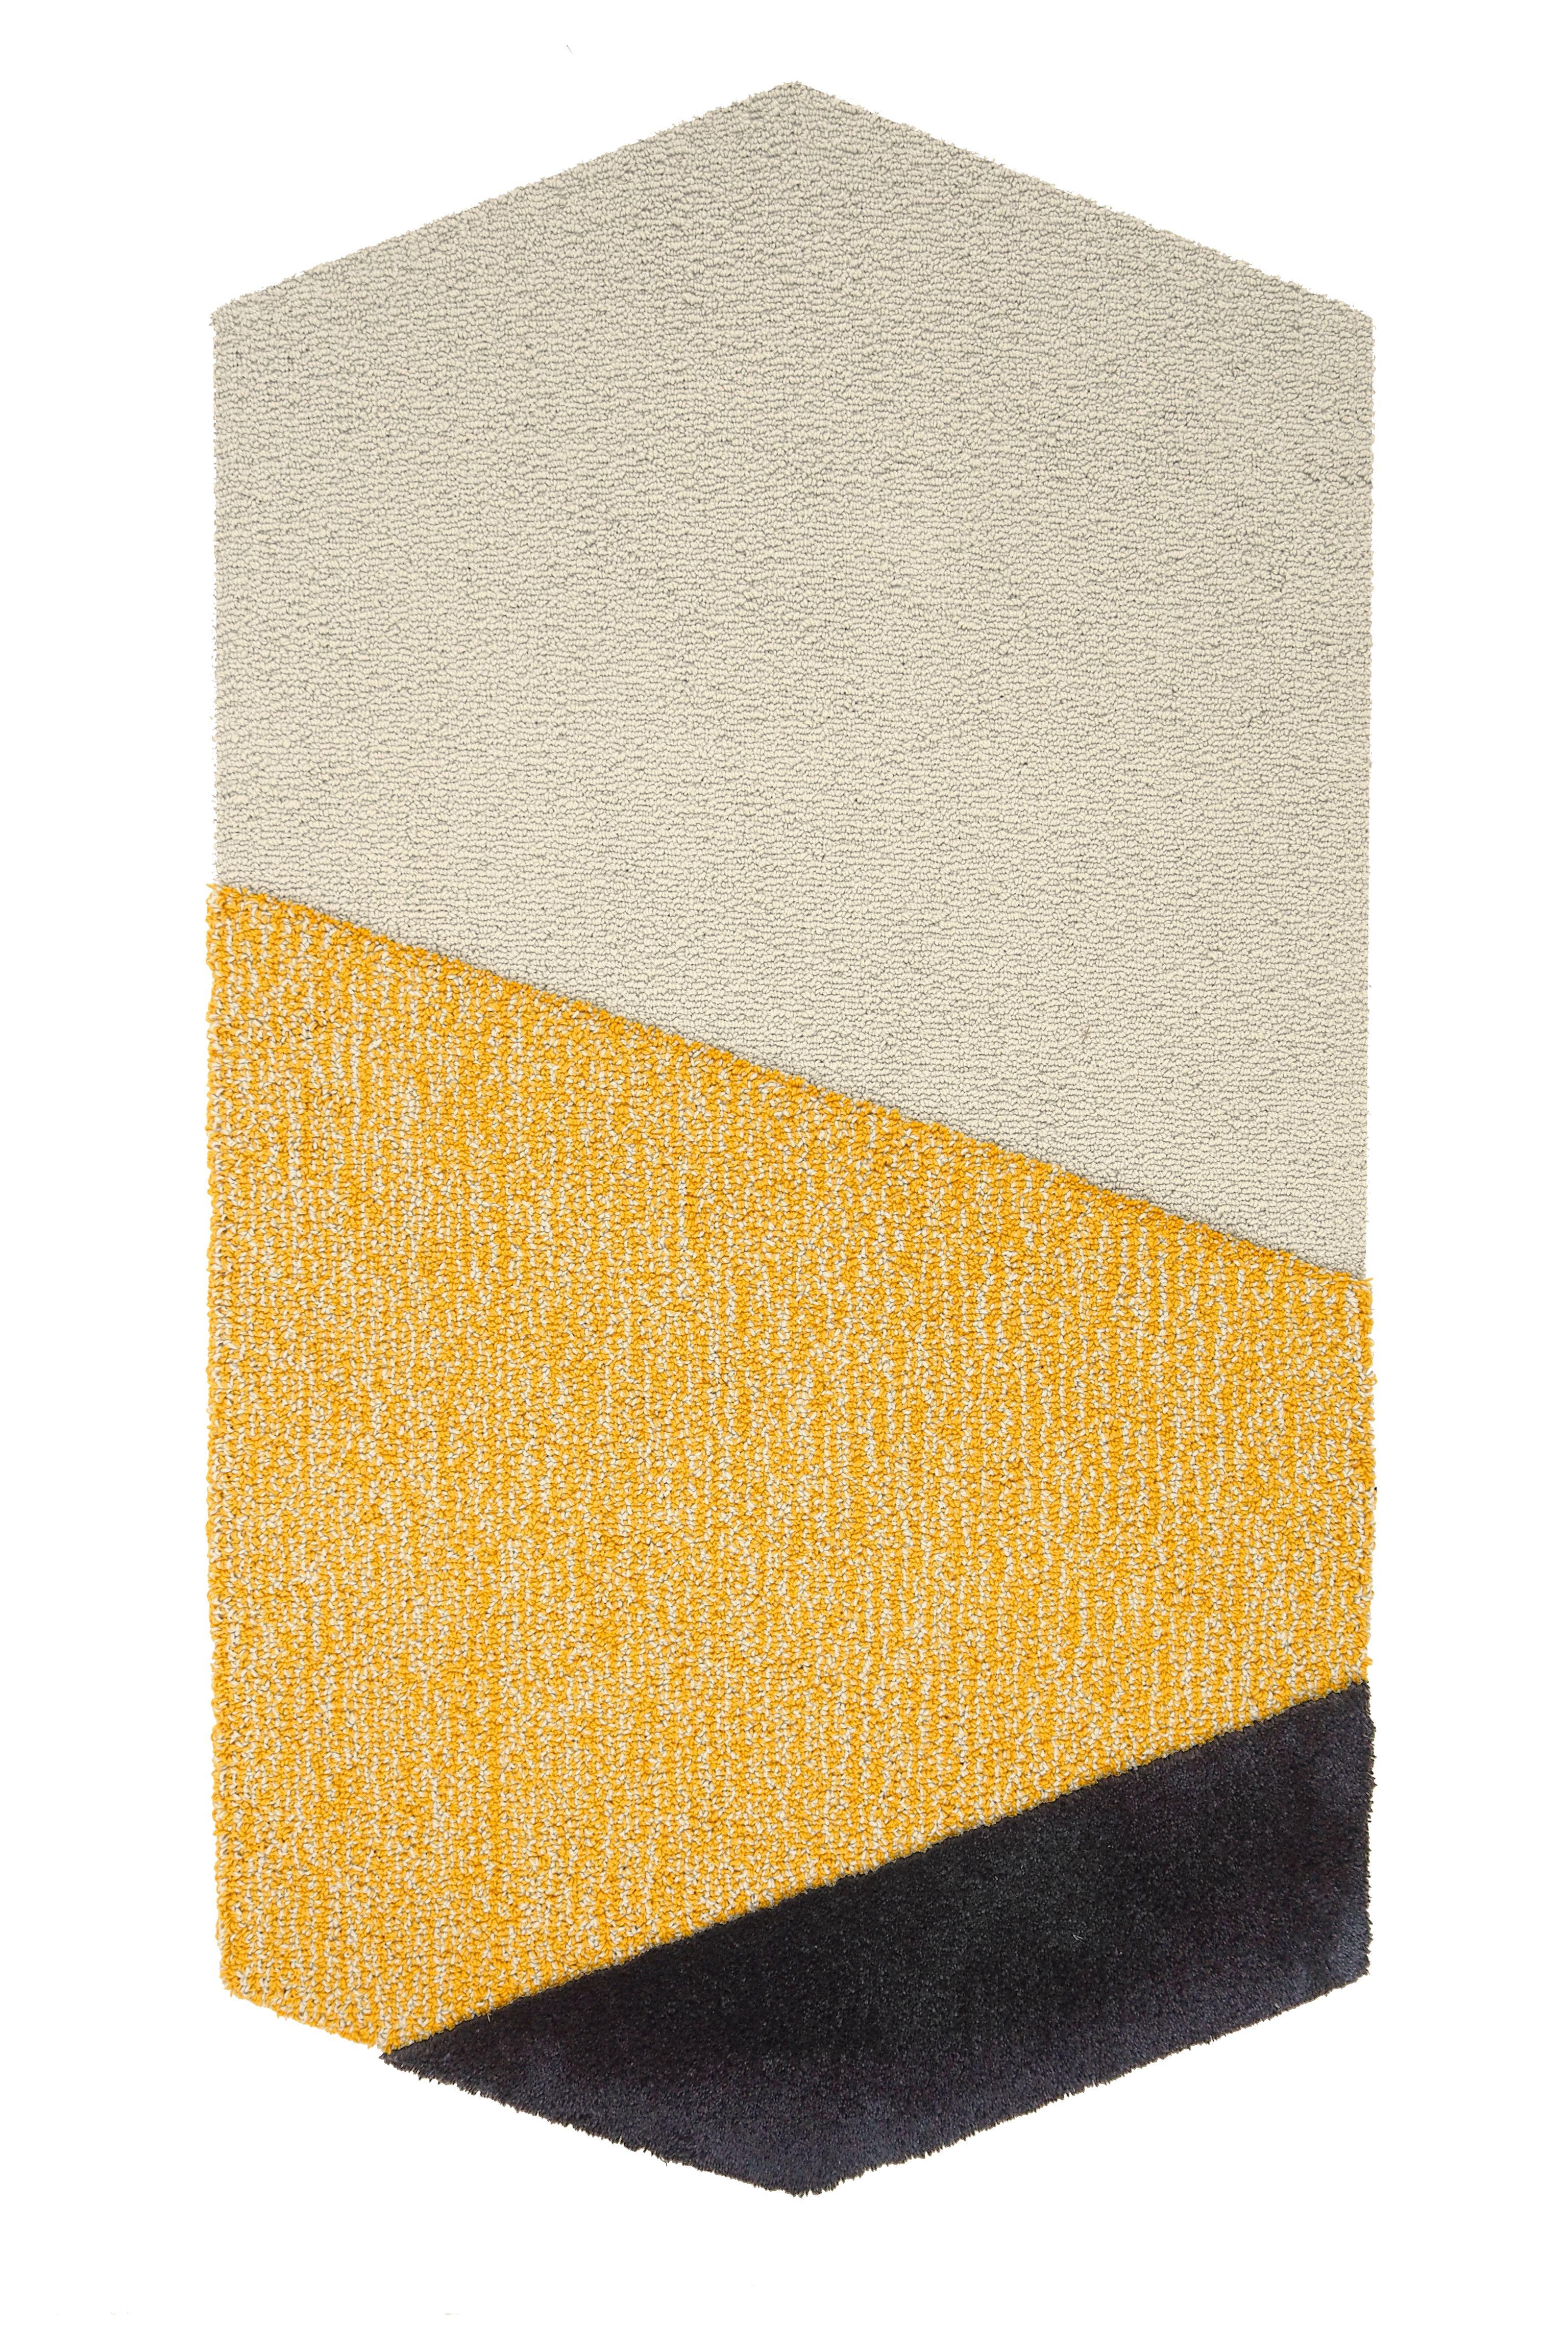 Modern Oci Triptych M, Composition of 3 Rugs 100% Wool /Yellow and Deep Gray by Portego For Sale